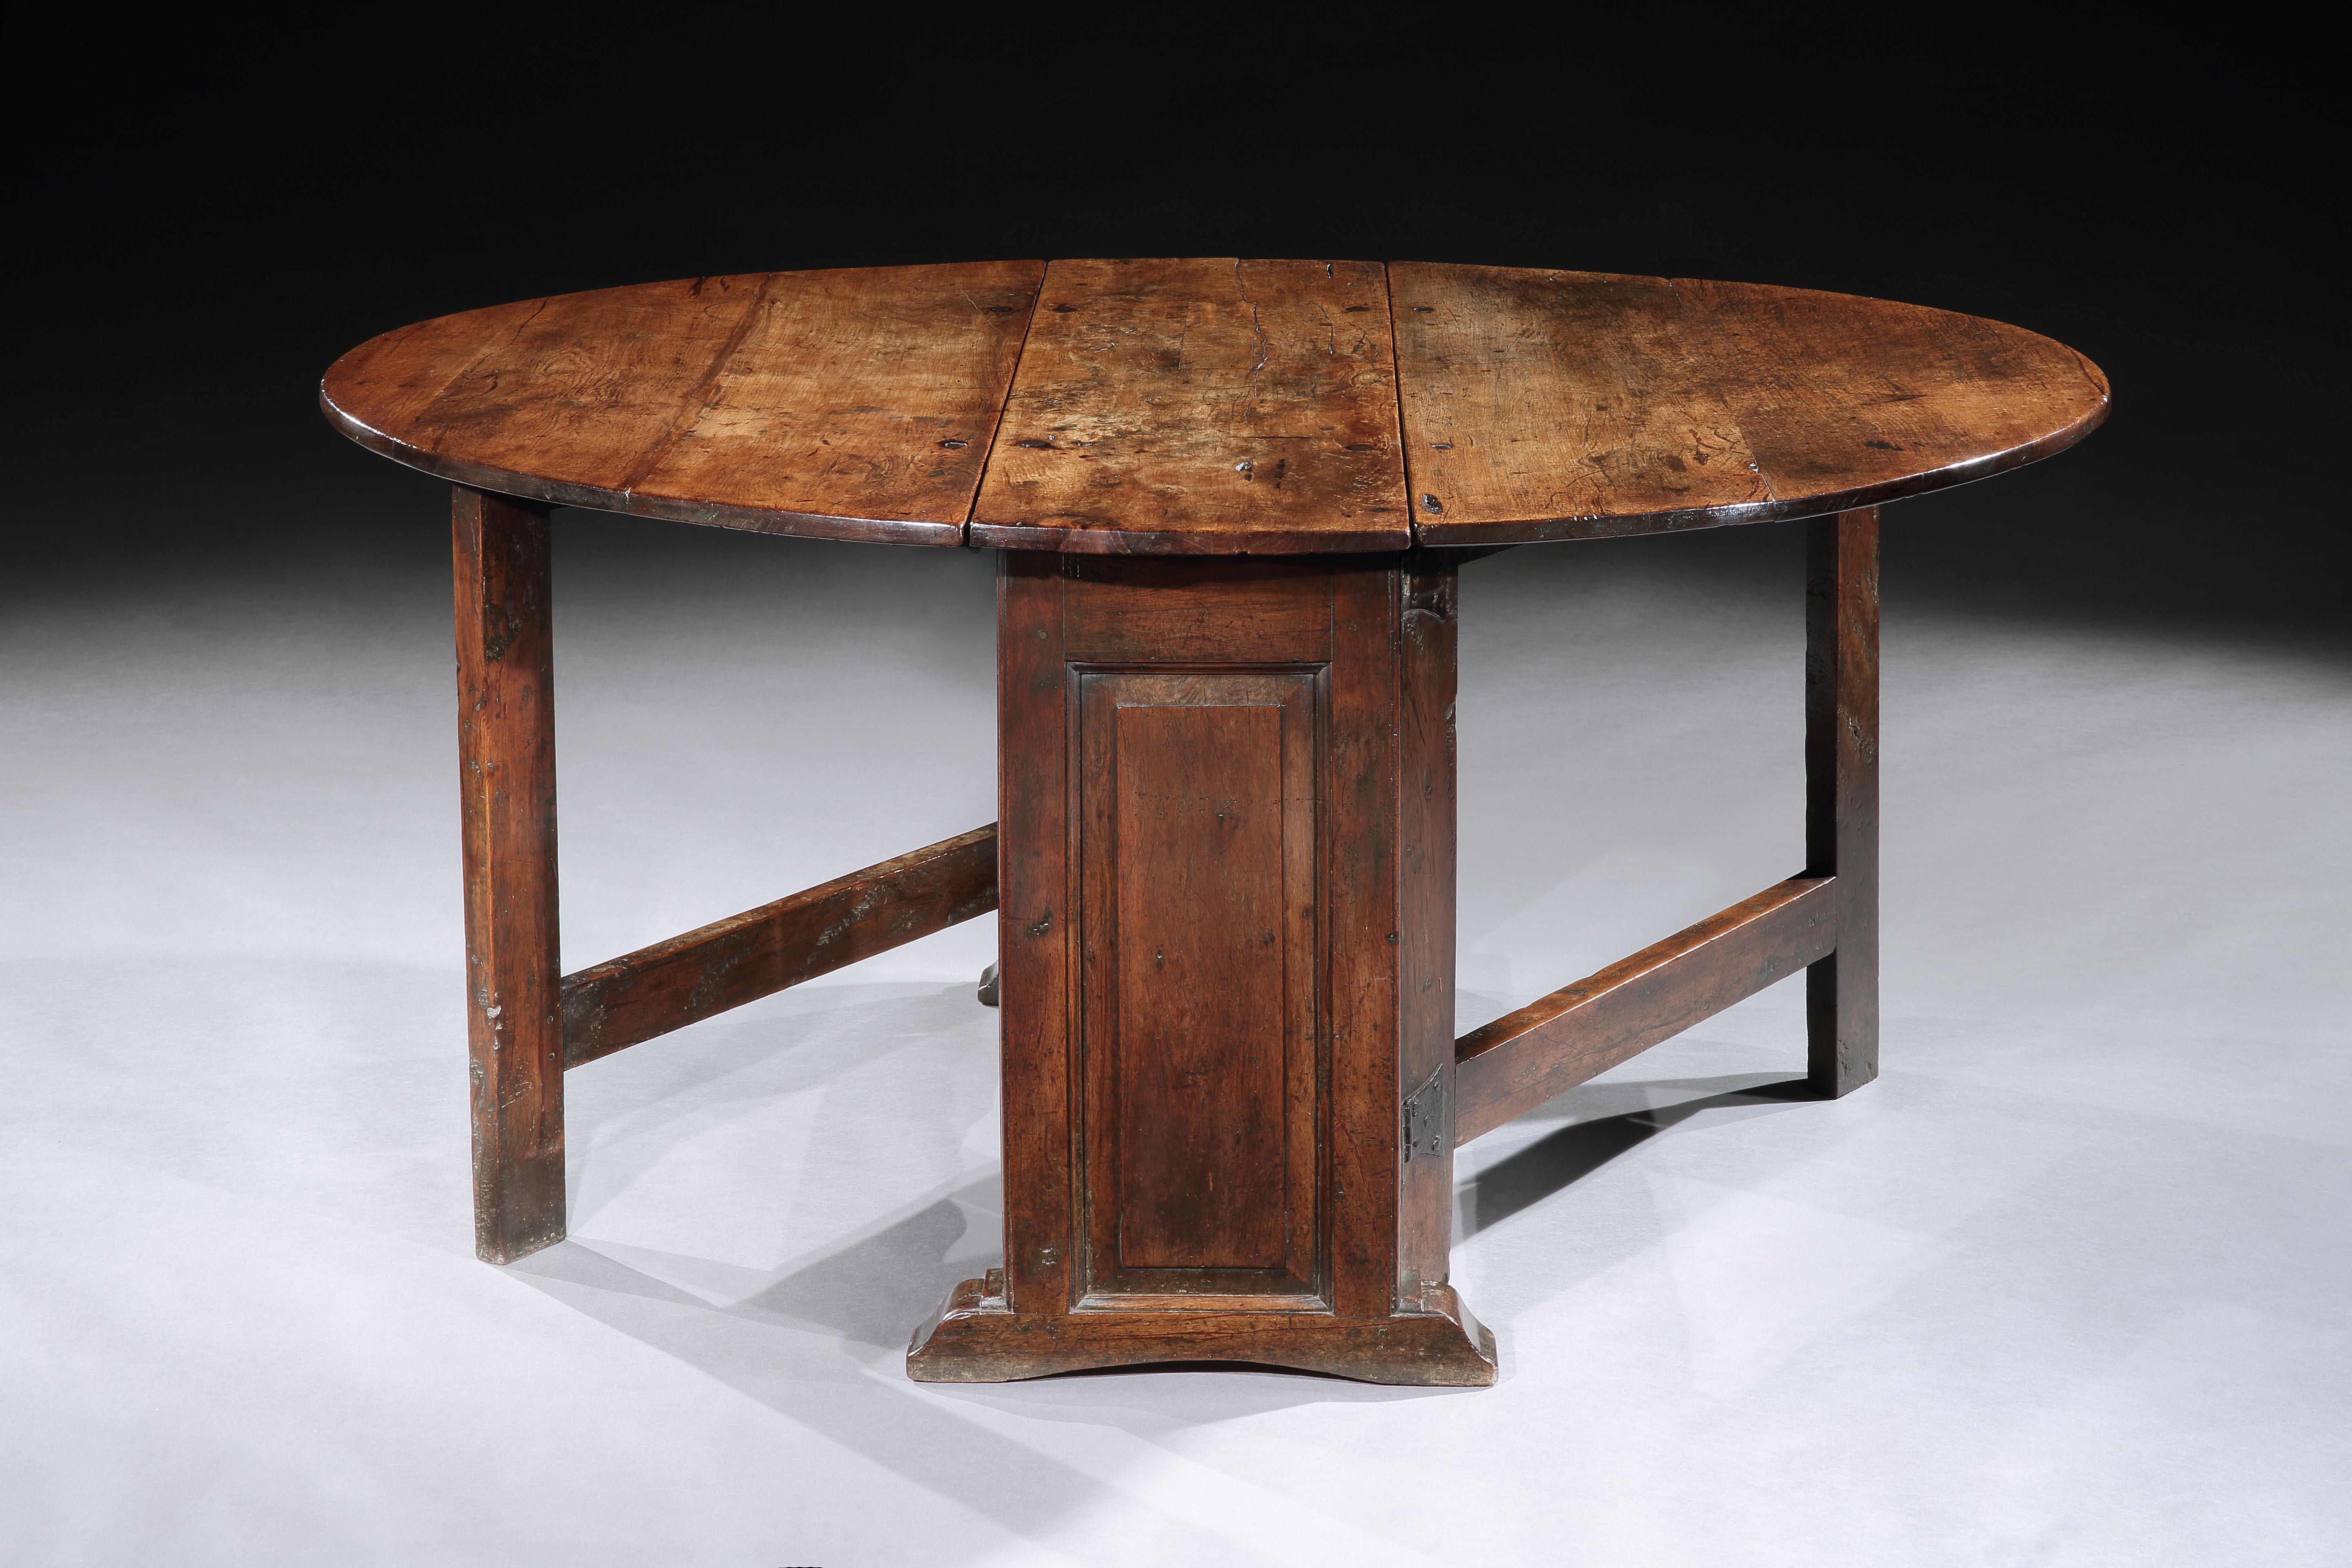 - This table is the most original and superior example of a small surviving group of a rare, early model of gateleg table dating between 1620 and 1650.  
- It is more sophisticated than the other tables in the group discussed below which are either